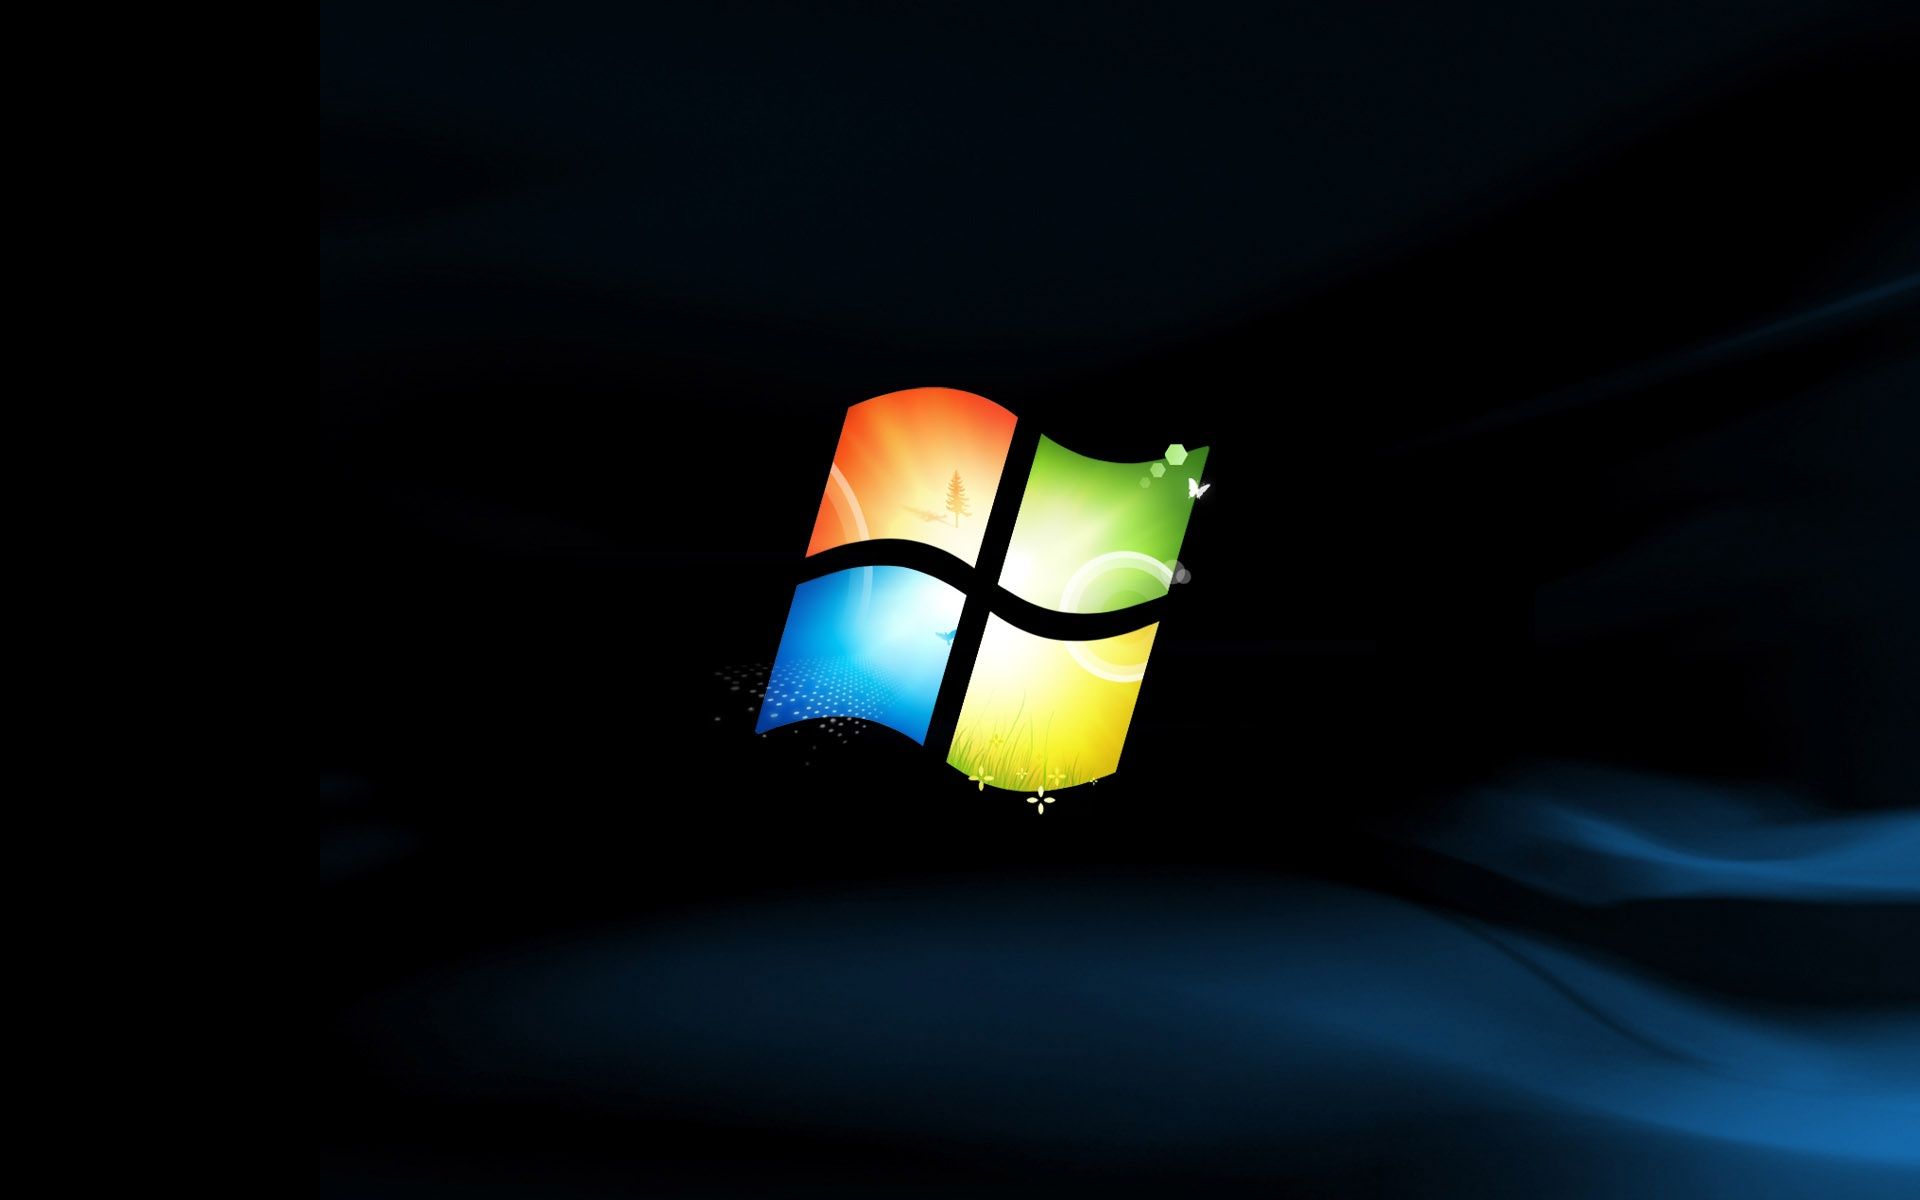 Cool Windows 7 Backgrounds - Wallpaper Cave